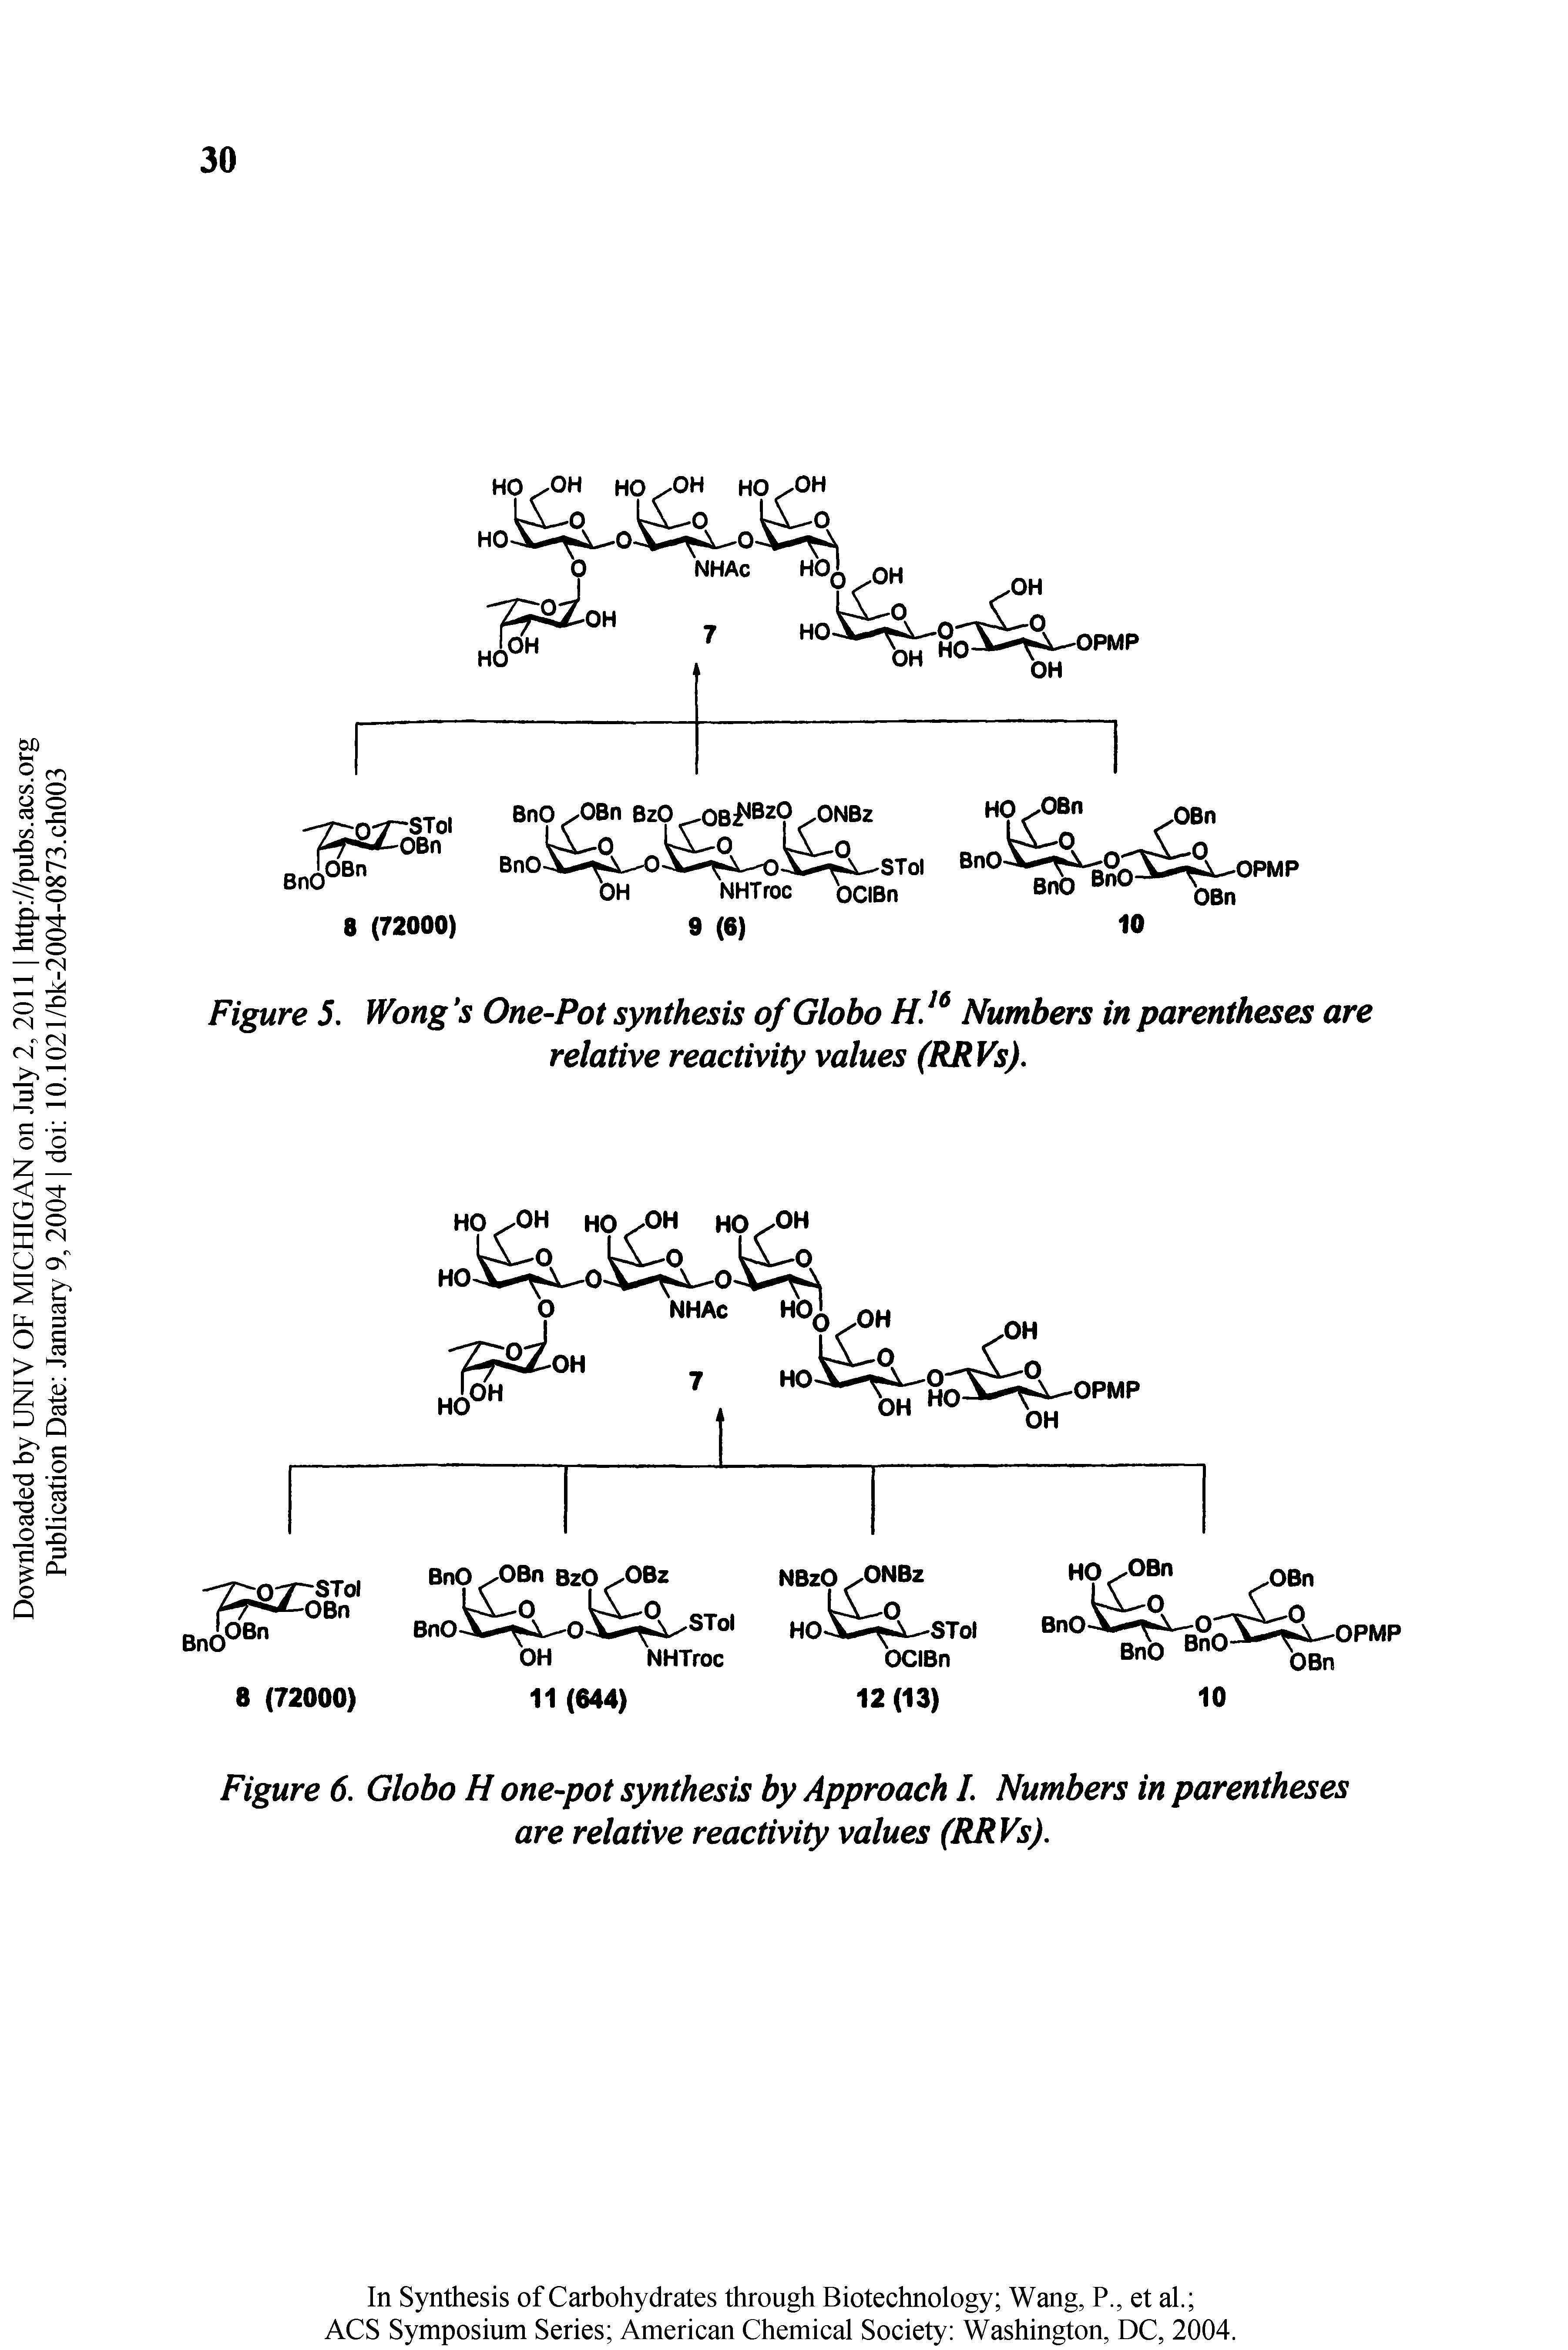 Figure 5. Wong s One-Pot synthesis of Globo H. Numbers in parentheses are relative reactivity values (RRVs).